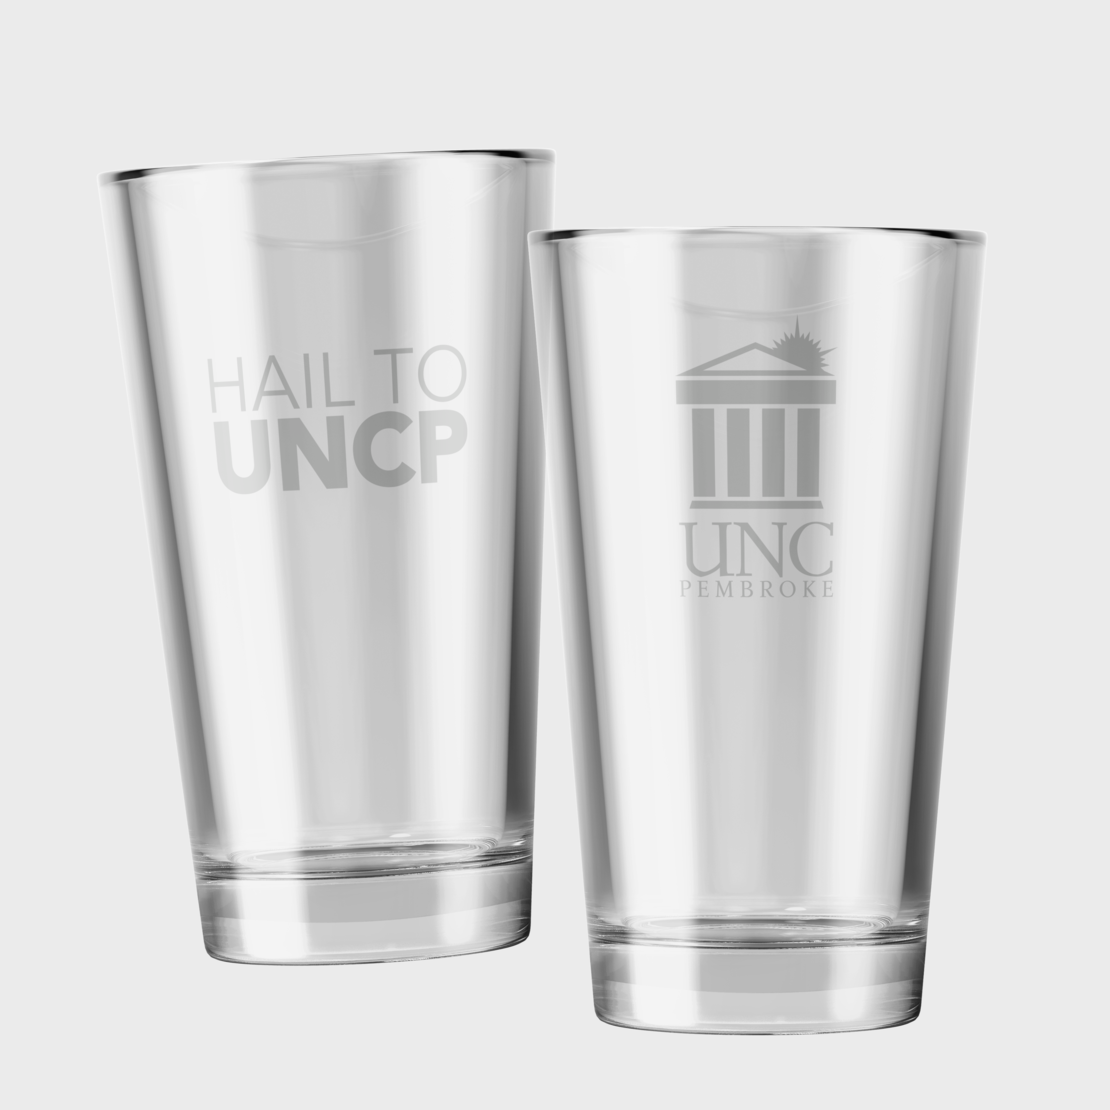 Set of 2 Hail To UNCP Pint Size Glasses